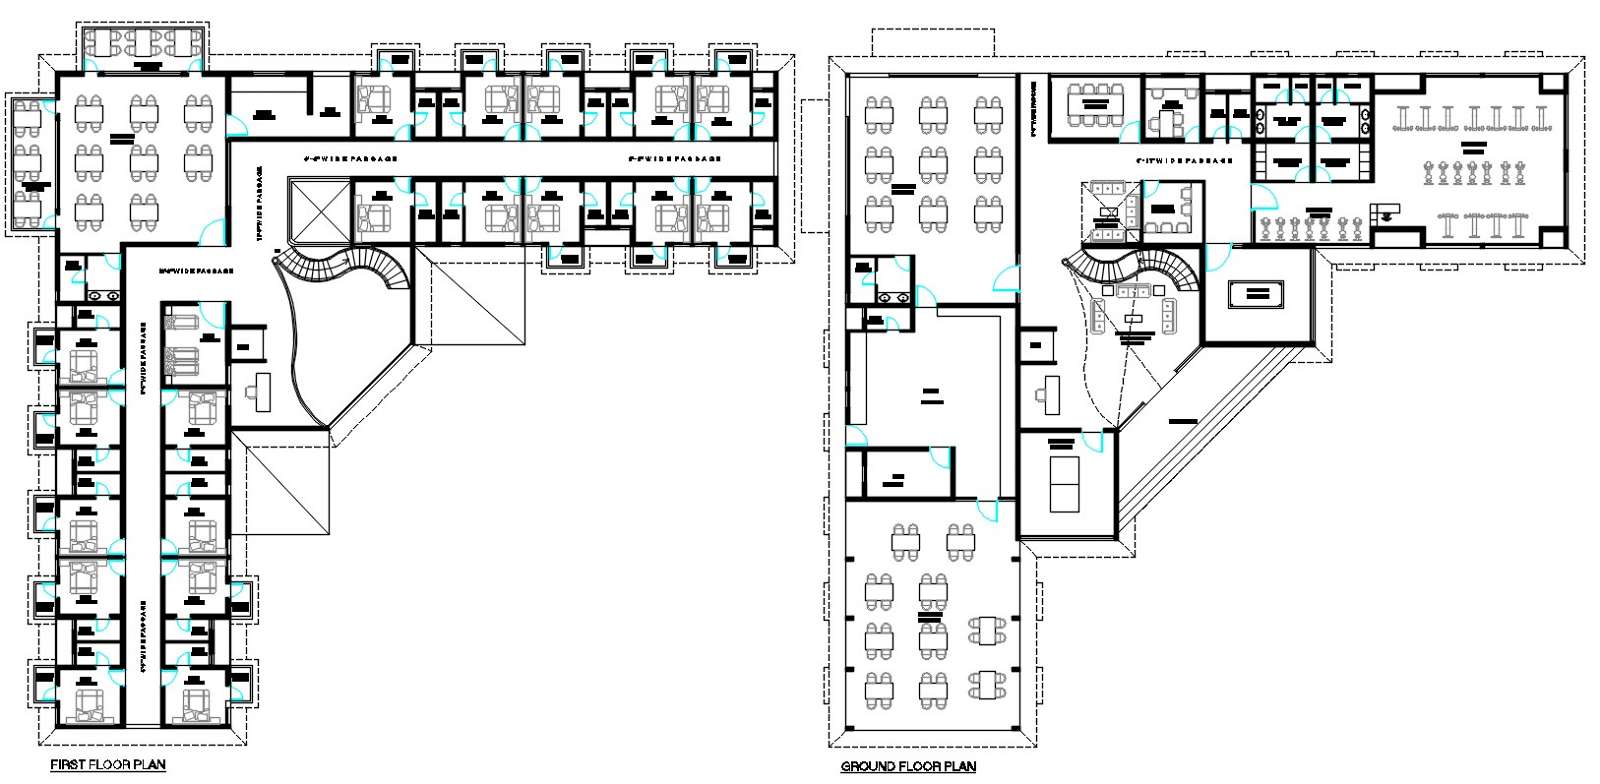 AutoCAD File Of Hotel Architecture Floor Plan CAD Drawing - Cadbull